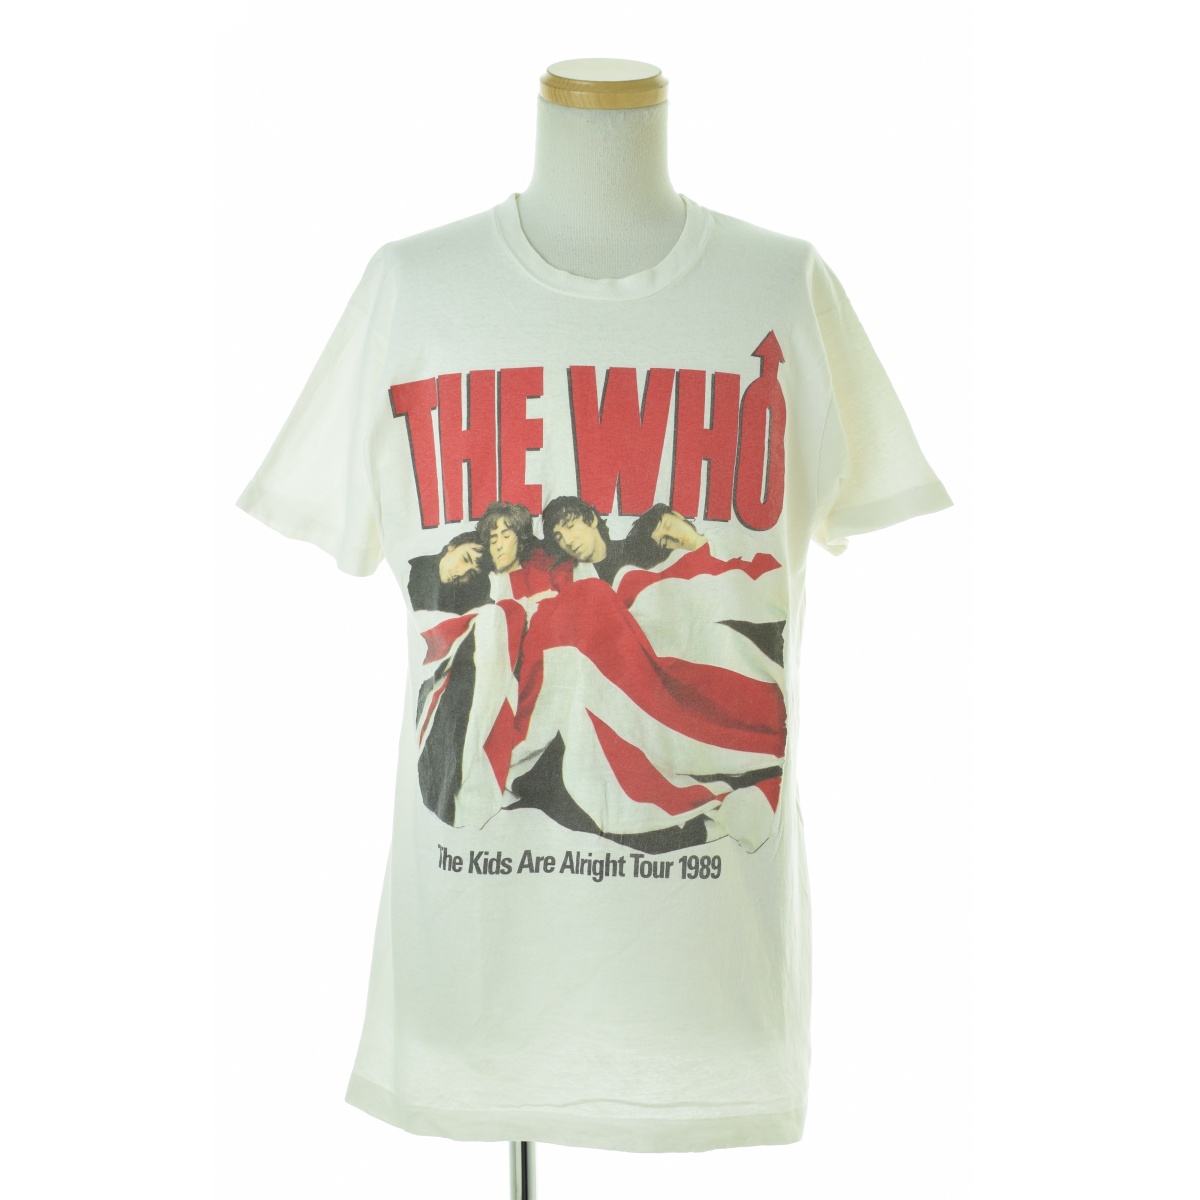 VINTAGE / ơθ80s THE WHO THE KIDS ARE ALRIGHT TOUR 1989ȾµTġרܺٲ